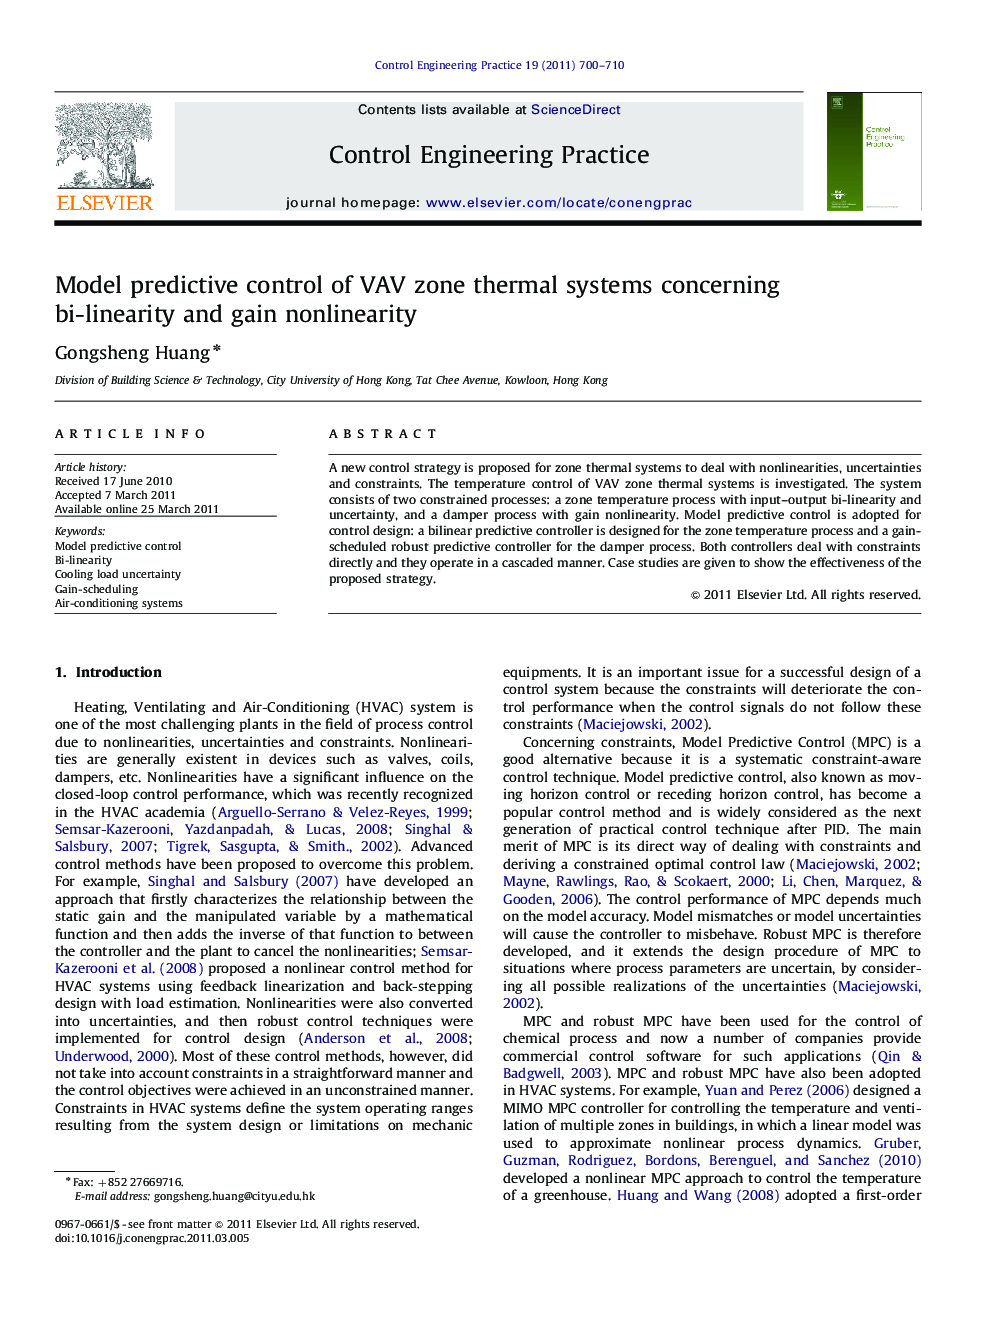 Model predictive control of VAV zone thermal systems concerning bi-linearity and gain nonlinearity